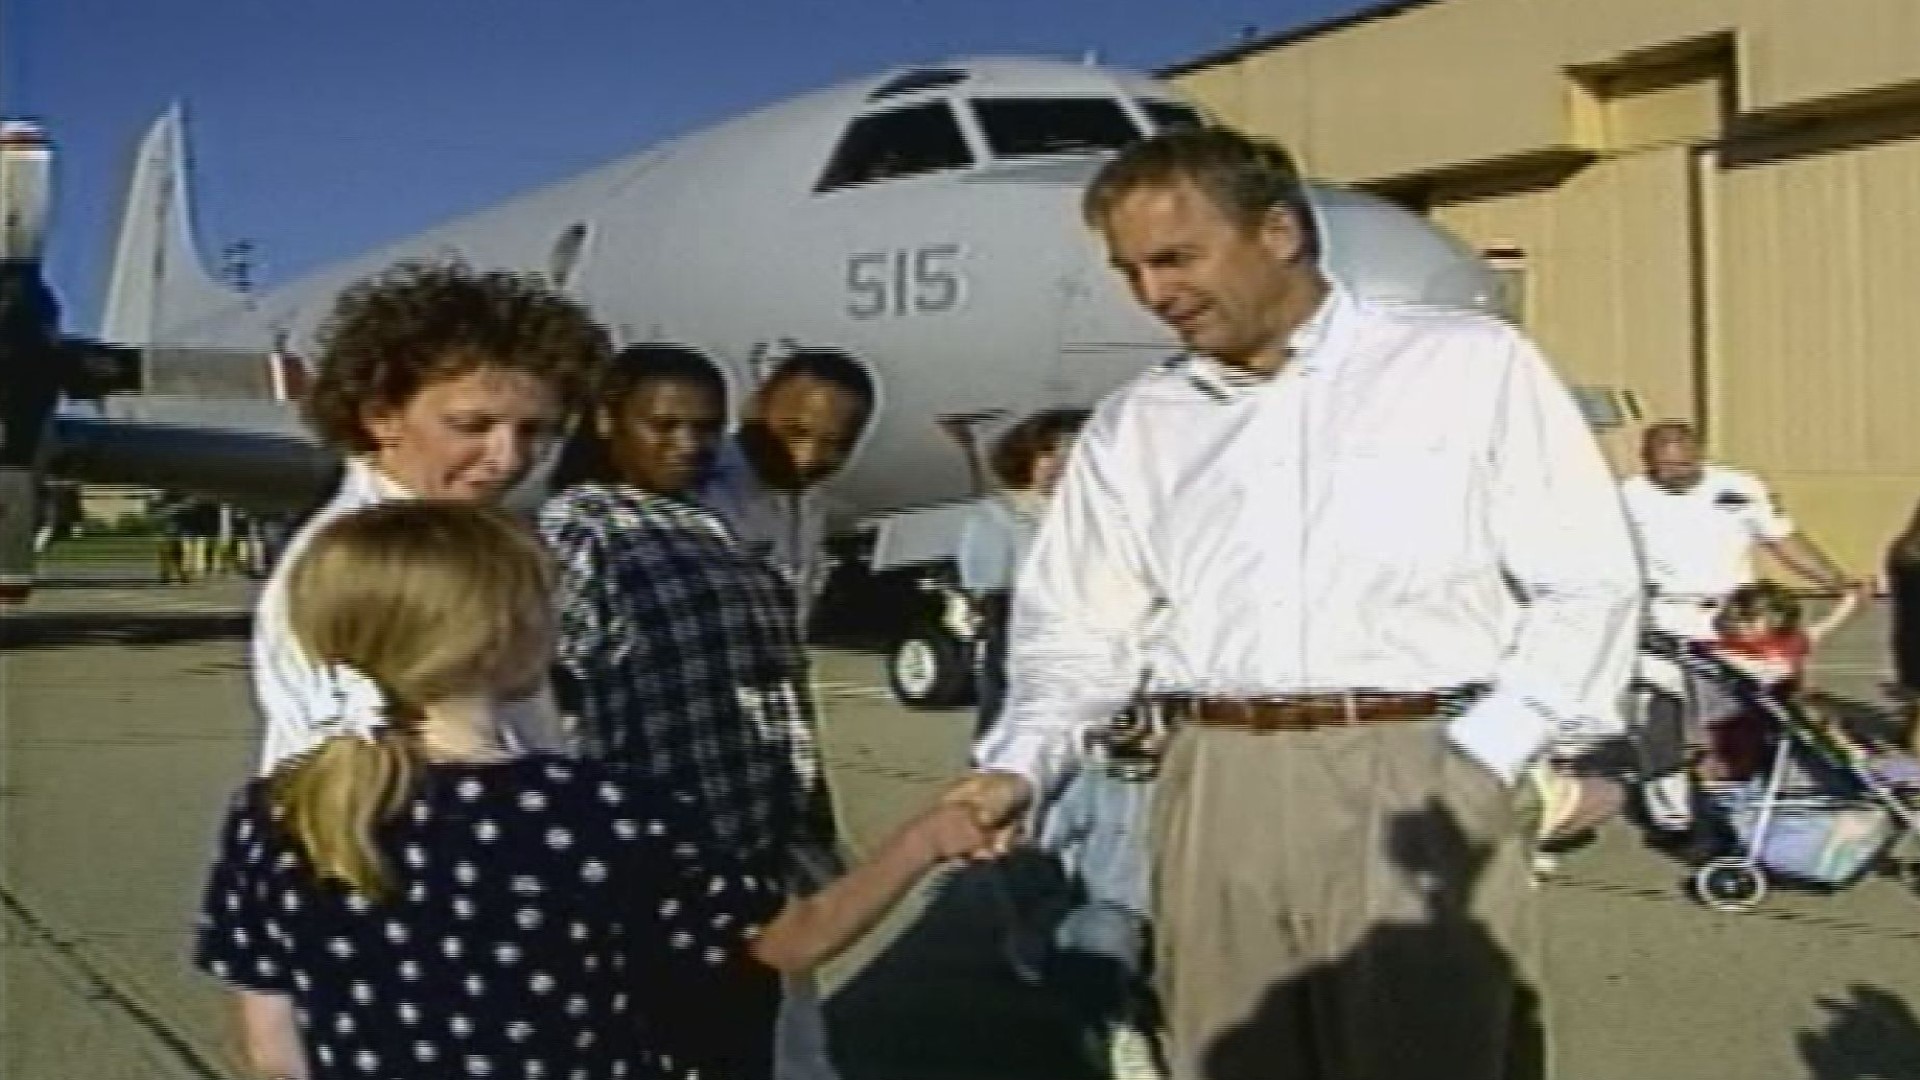 Fans found Kevin Costner at Brunswick Naval Air Station in June 1998 as he flew into Maine to shoot scenes for the movie "Message in a Bottle" at a home in Portland.